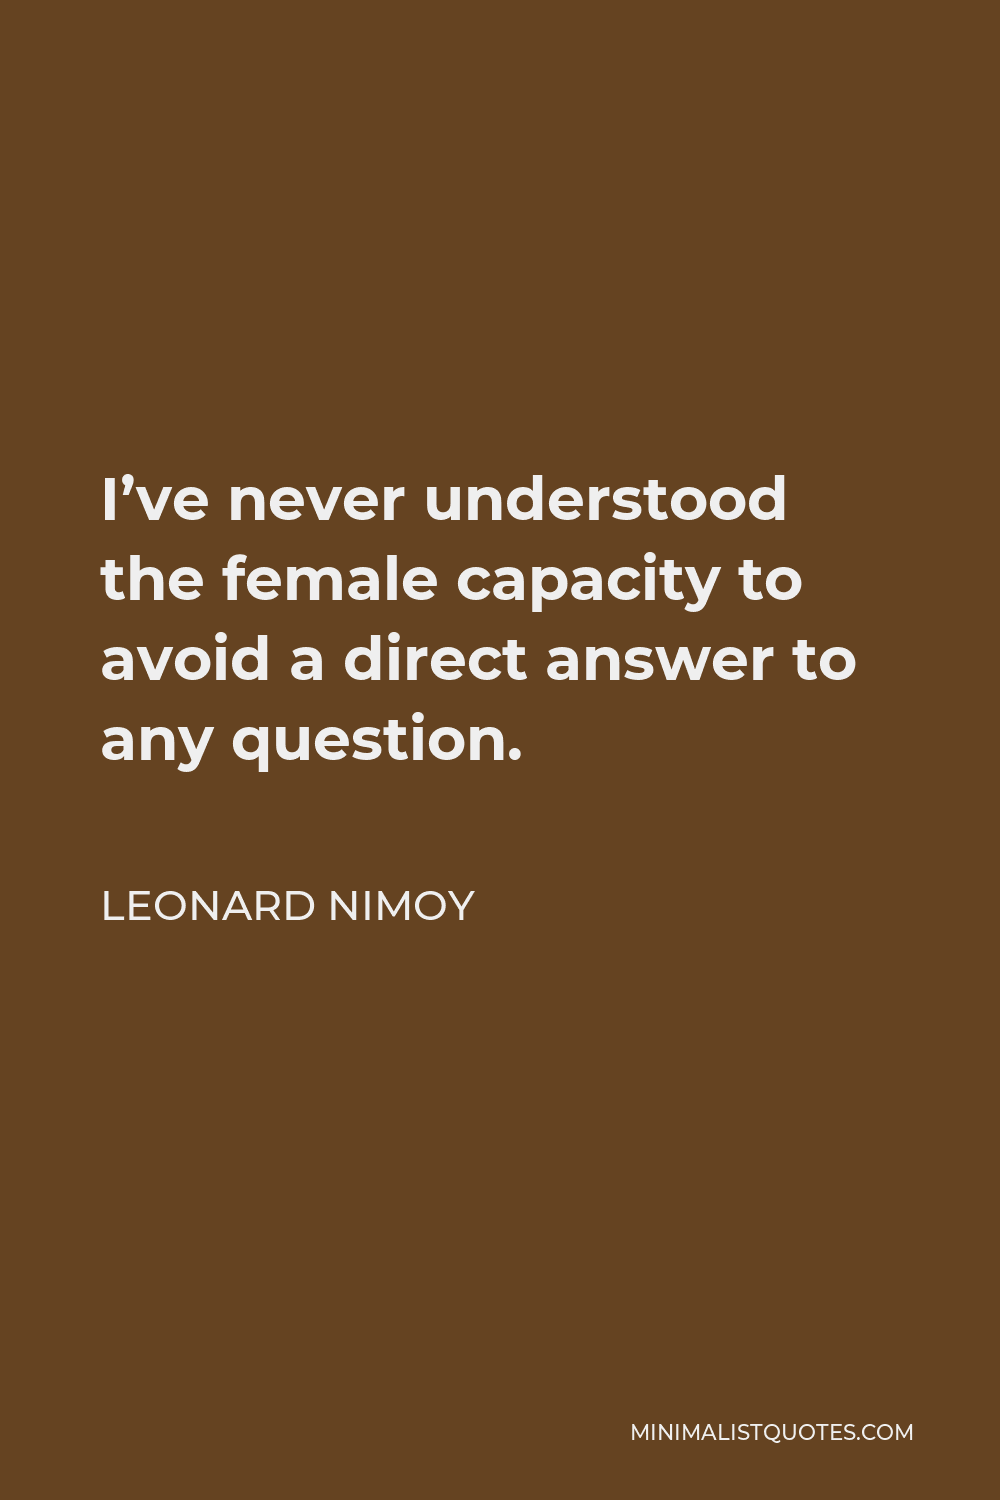 Leonard Nimoy Quote - I’ve never understood the female capacity to avoid a direct answer to any question.